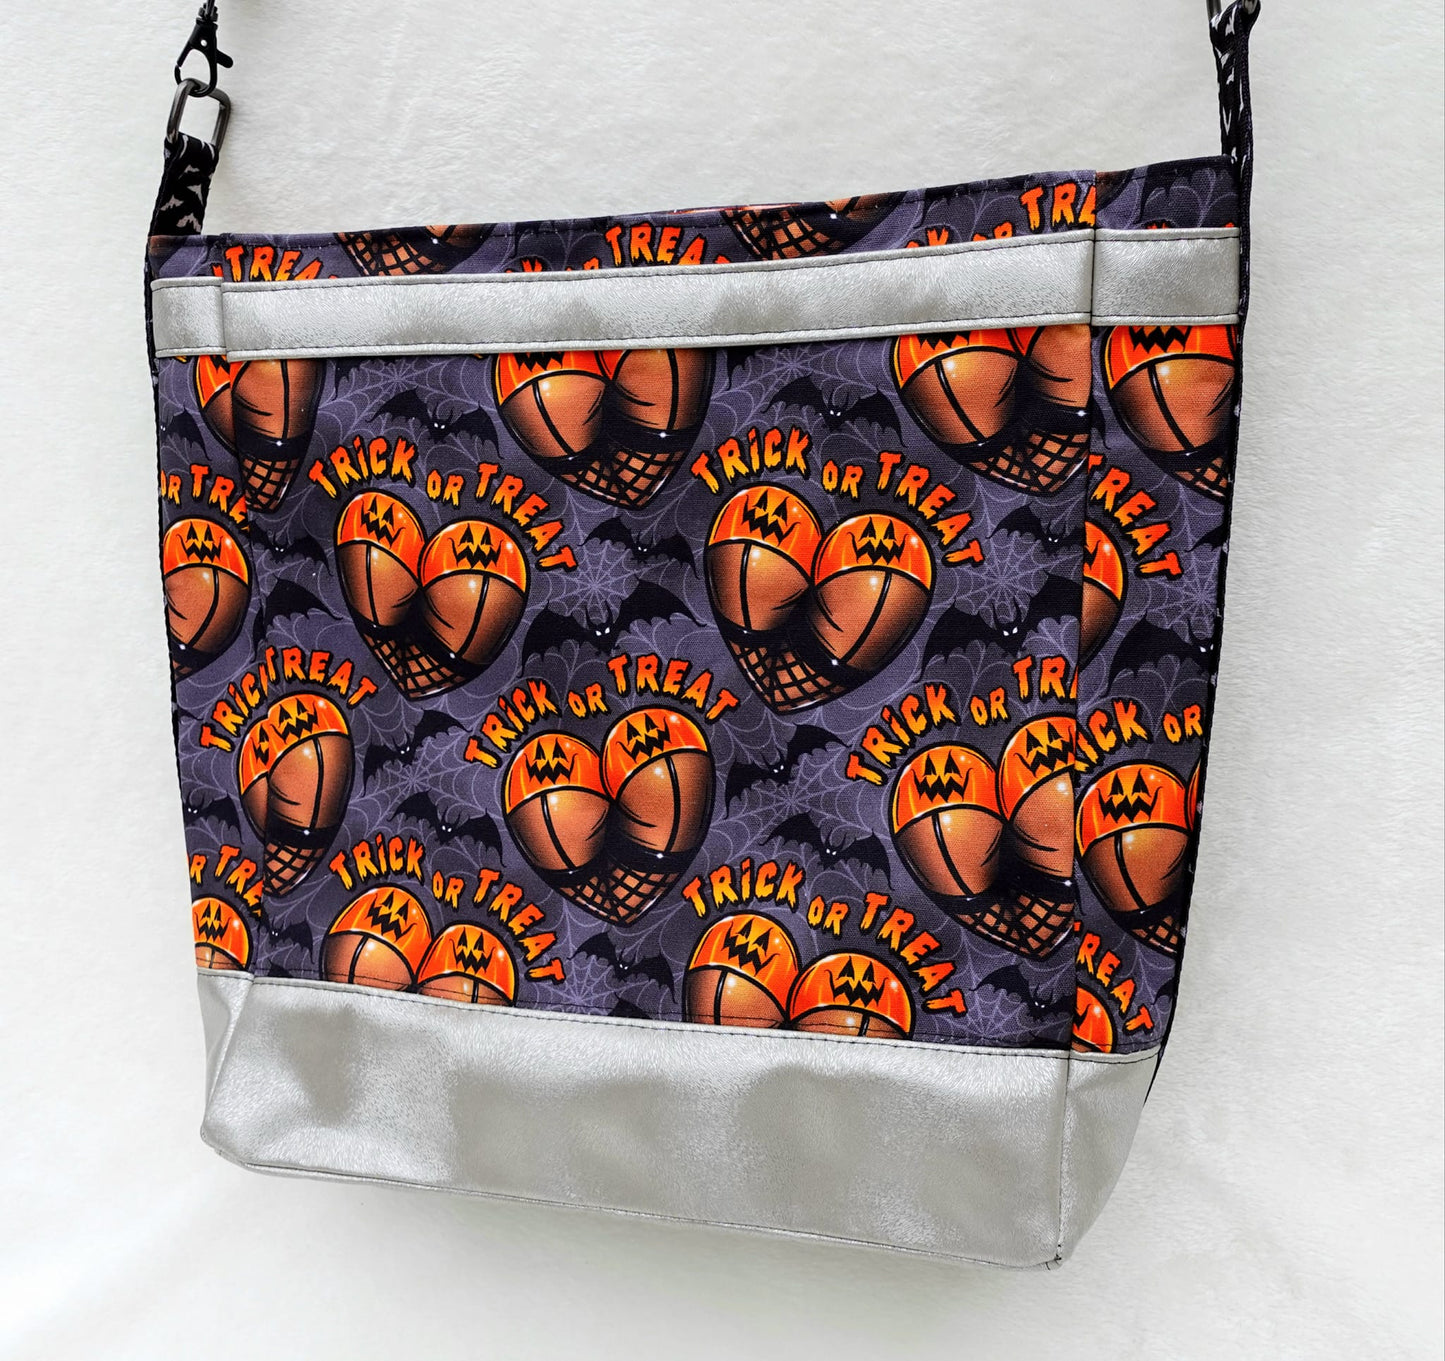 PATTERN - The Sanctuary Tote